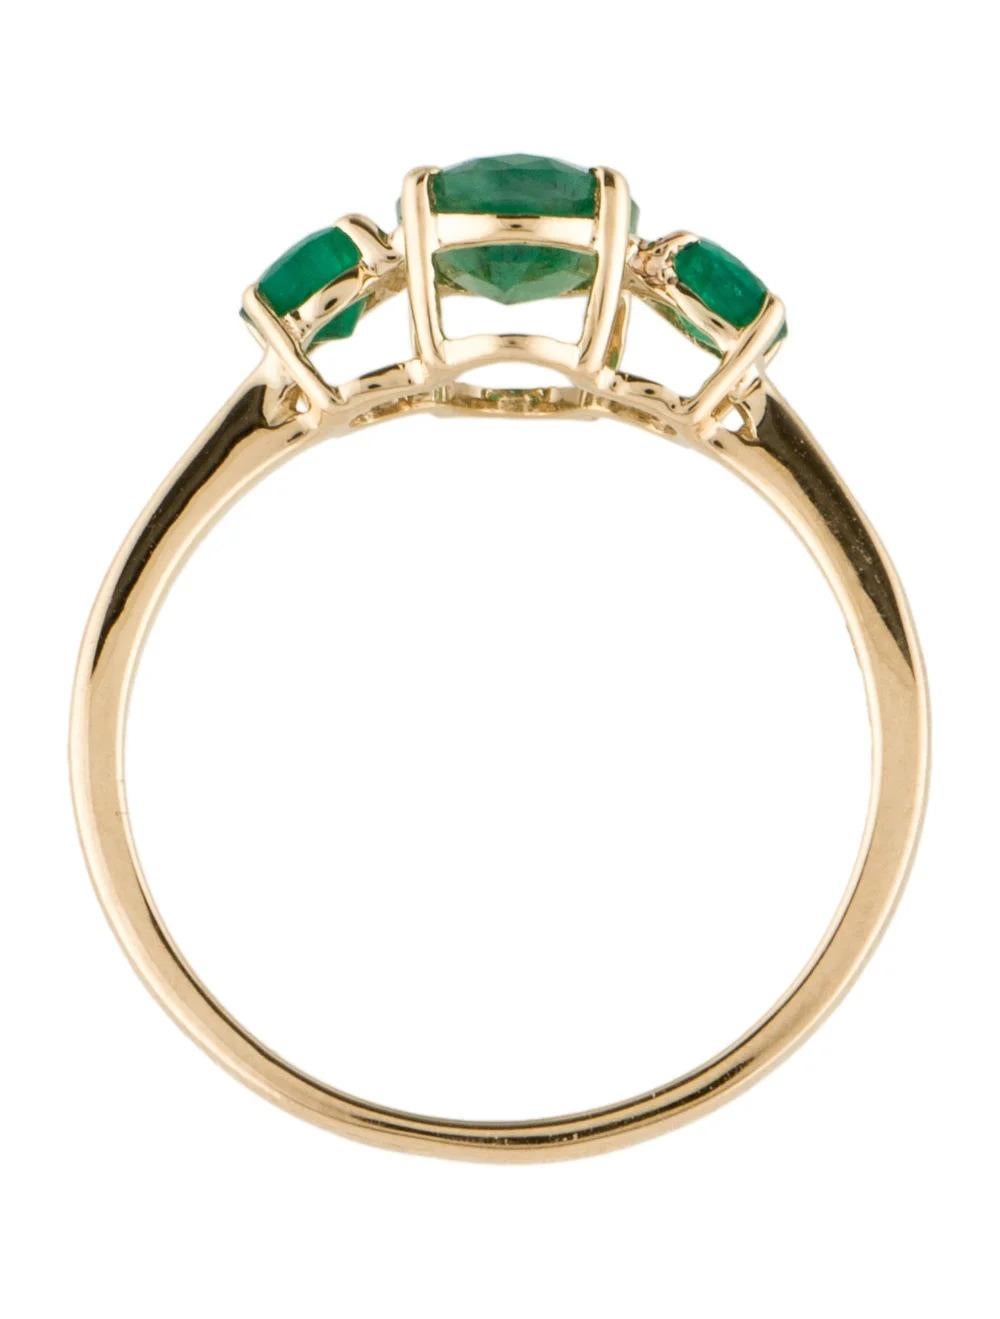 Women's 14K Emerald Cocktail Ring, Size 6.75: Stunning Design, Vibrant Color, Timeless For Sale